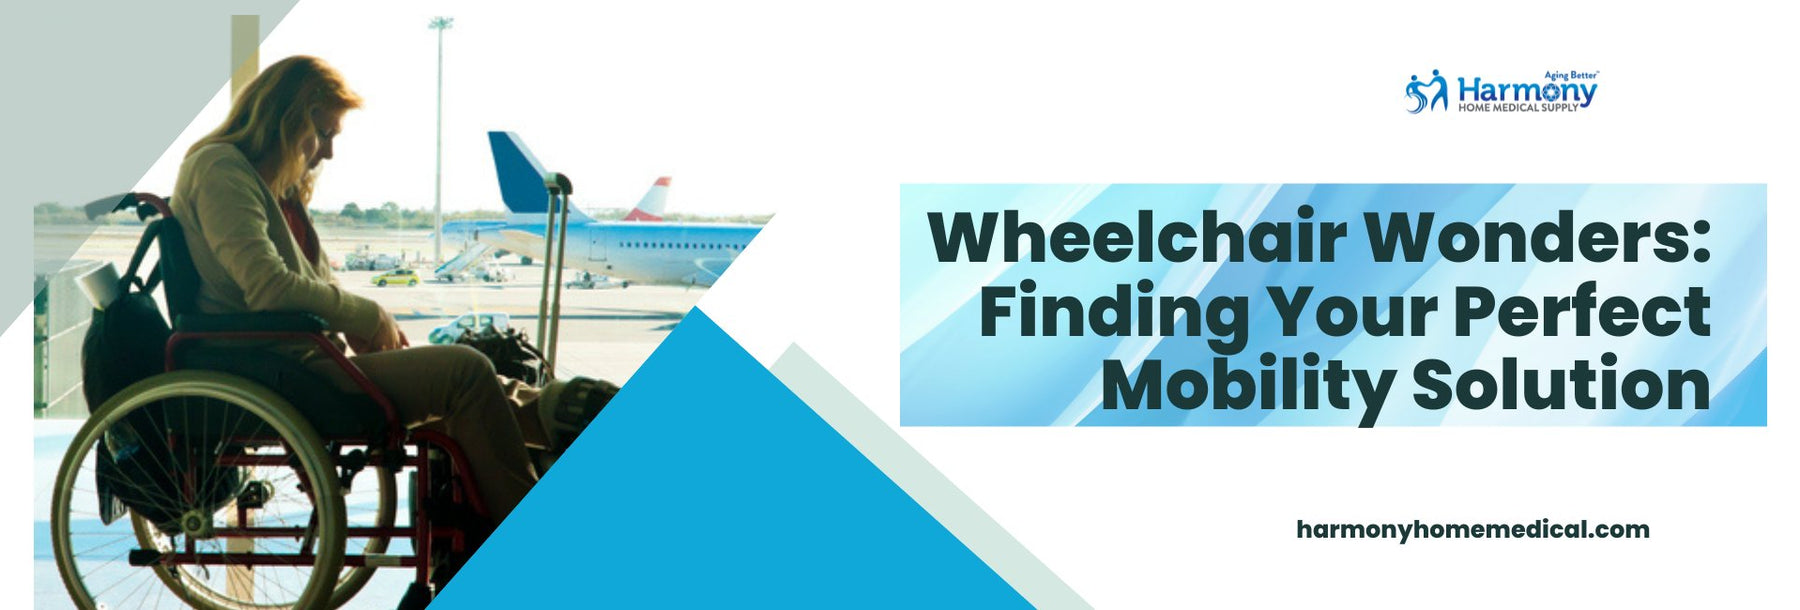 Wheelchair Wonders: Finding Your Perfect Mobility Solution - Harmony Home Medical Supply